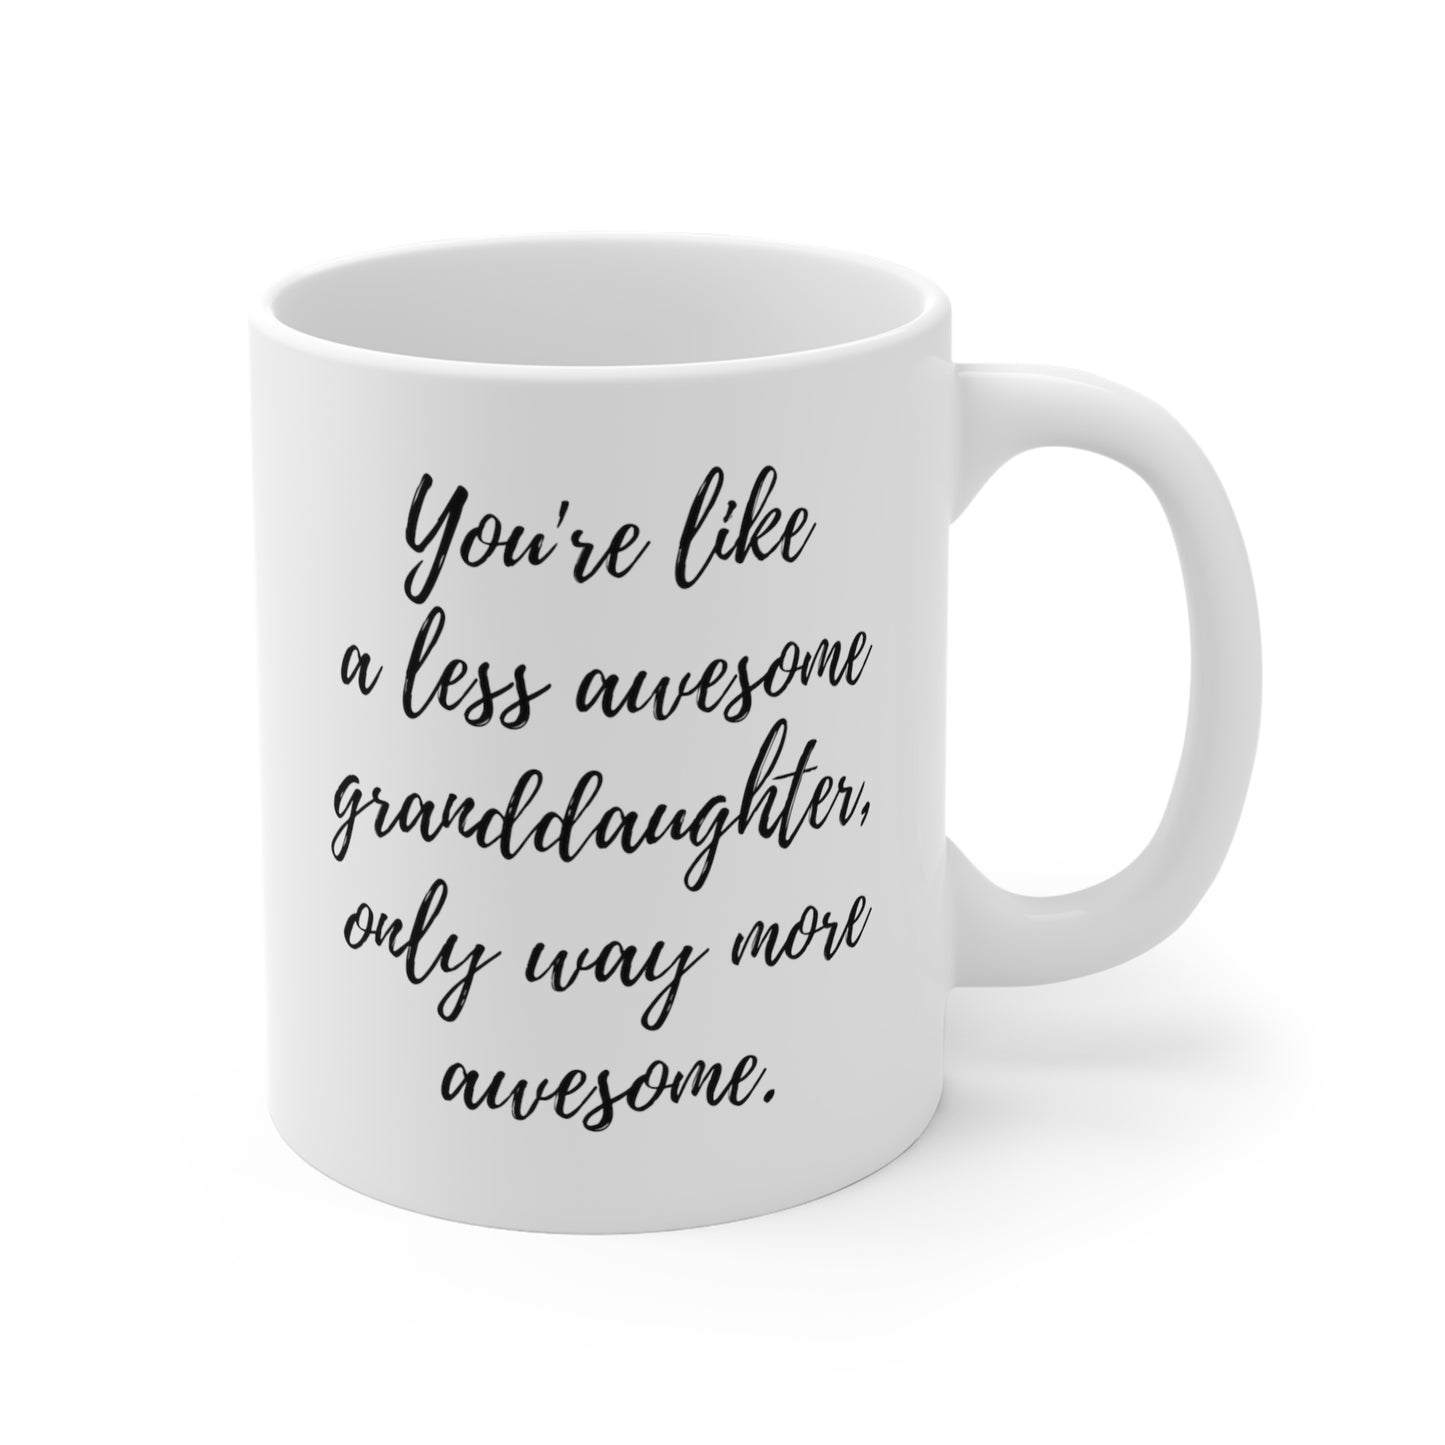 You're Like A Less Awesome Granddaughter, Only Way More Awesome | Funny, Snarky Gift | White Ceramic Mug, Script Font